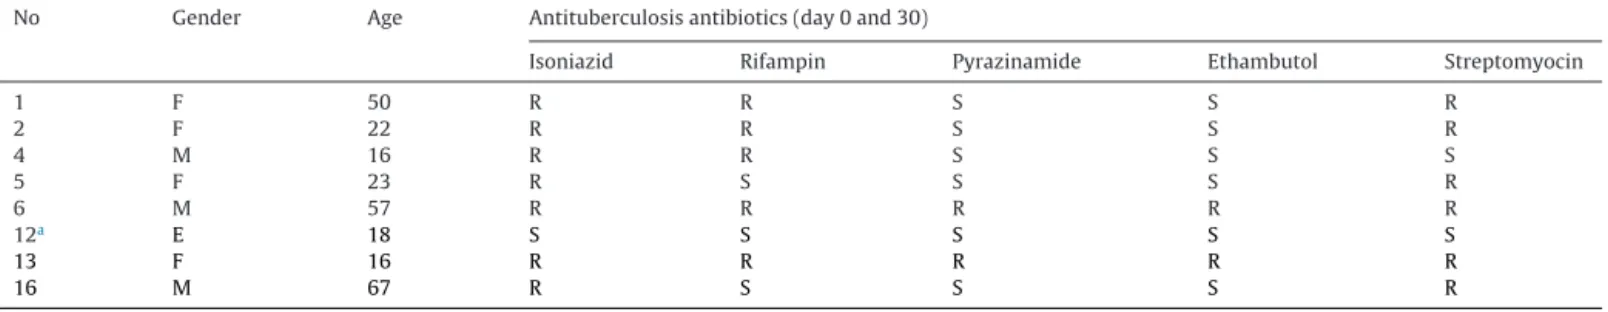 Table 2 shows the drug susceptibility testing results of patients